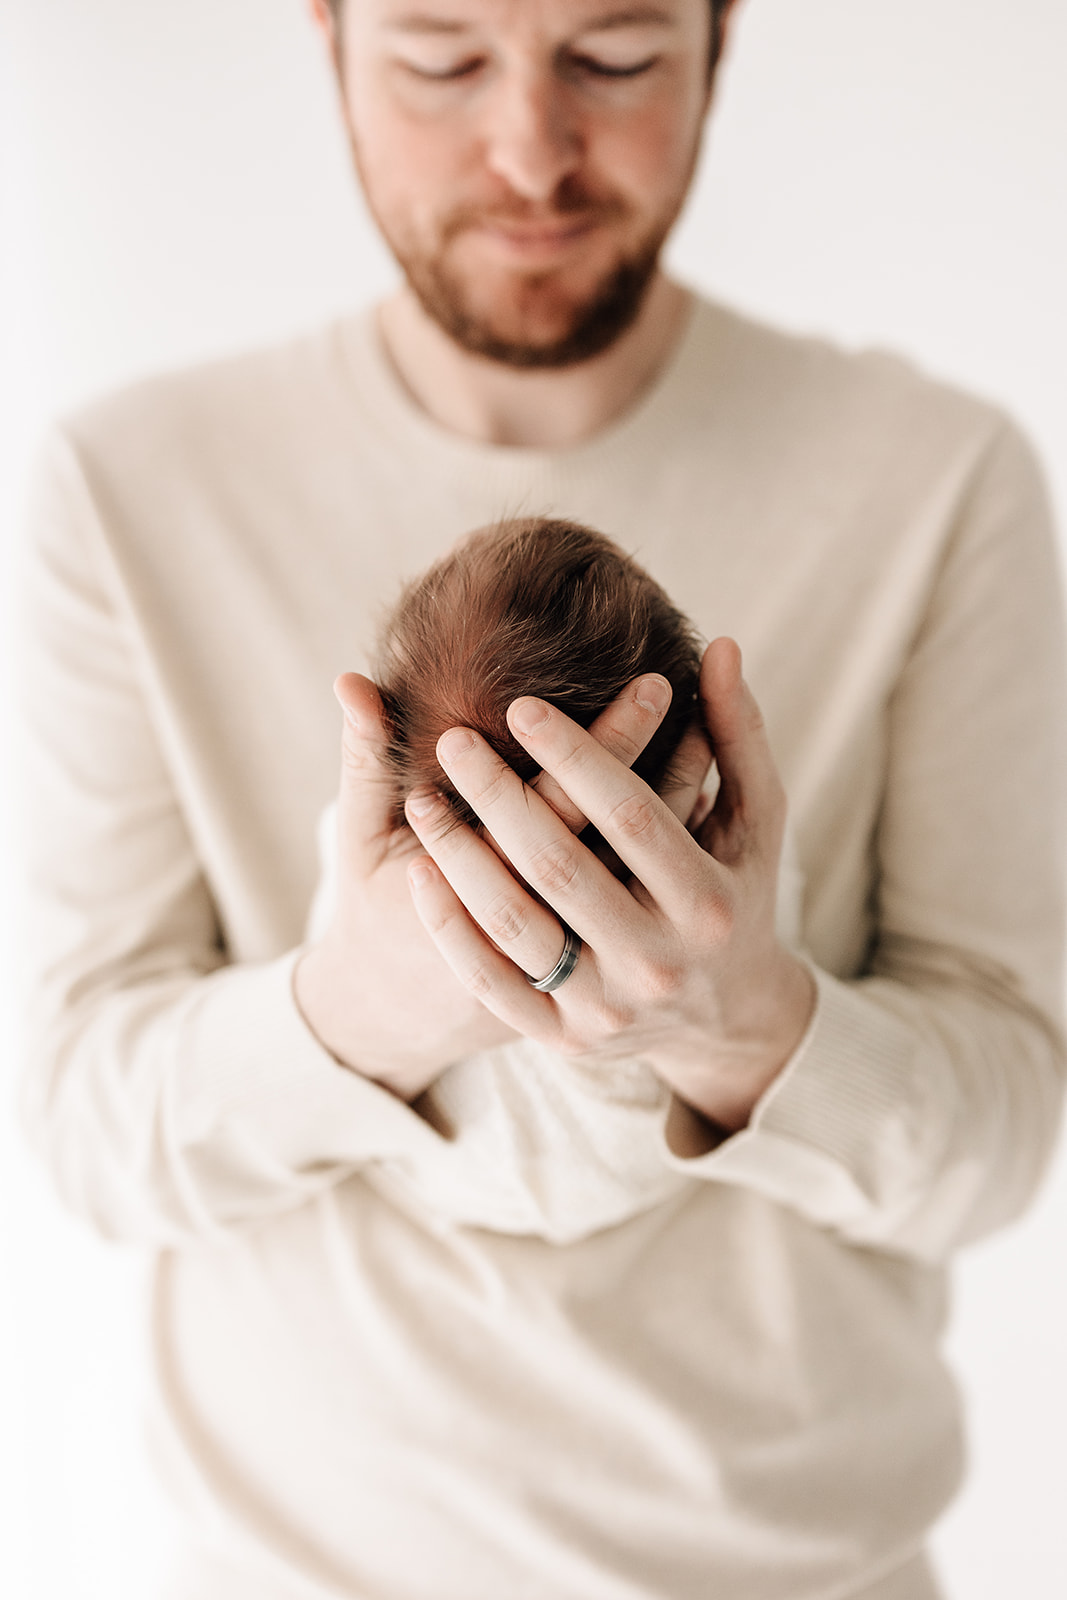 A father holds his sleeping newborn baby out in front of him while standing in a studio